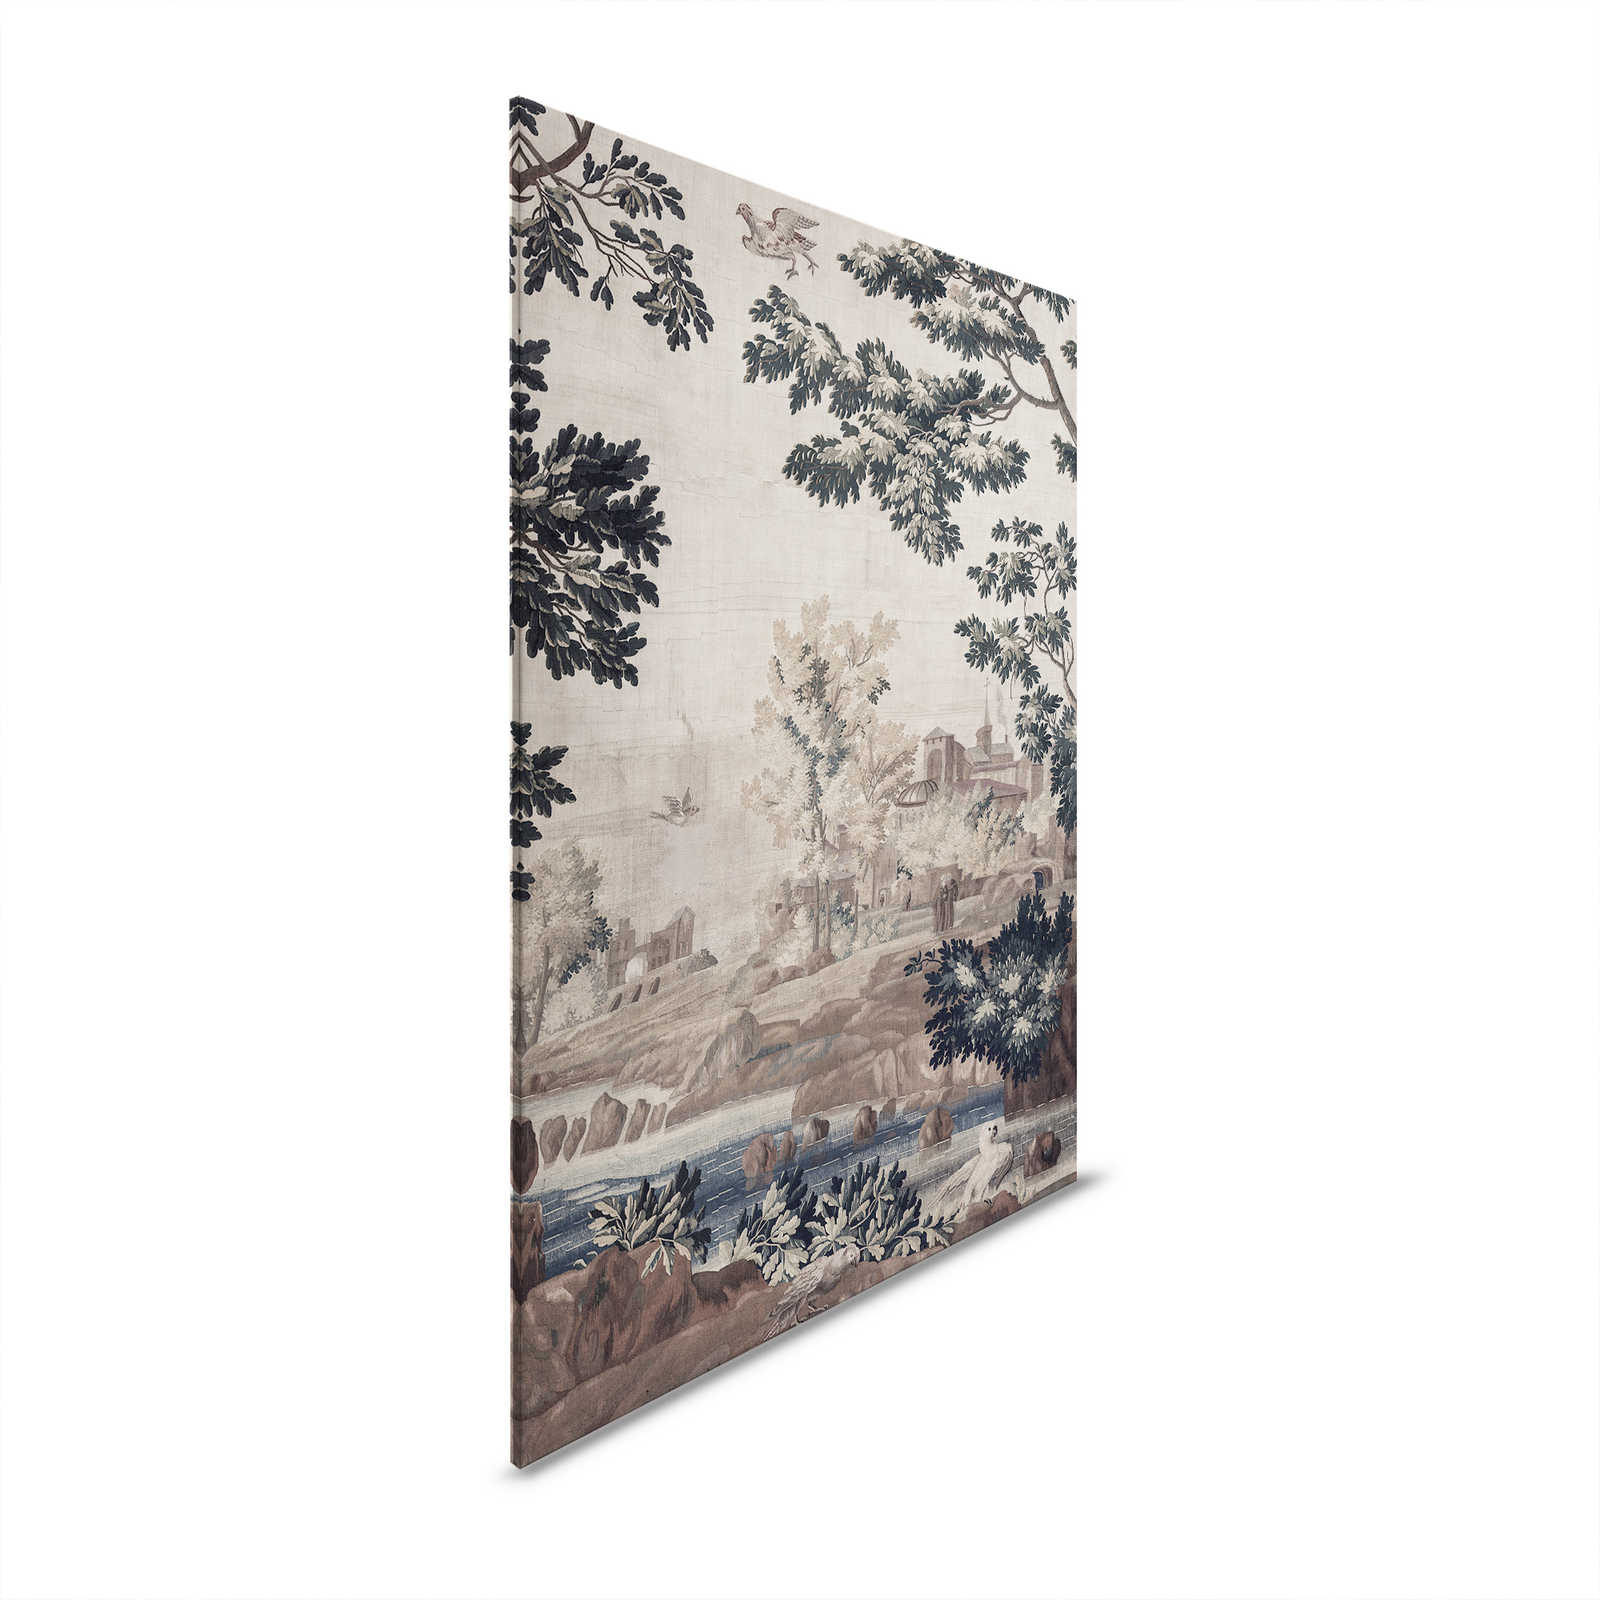 Gobelin Gallery 1 - Landscape canvas picture historical tapestry - 1.20 m x 0.80 m
